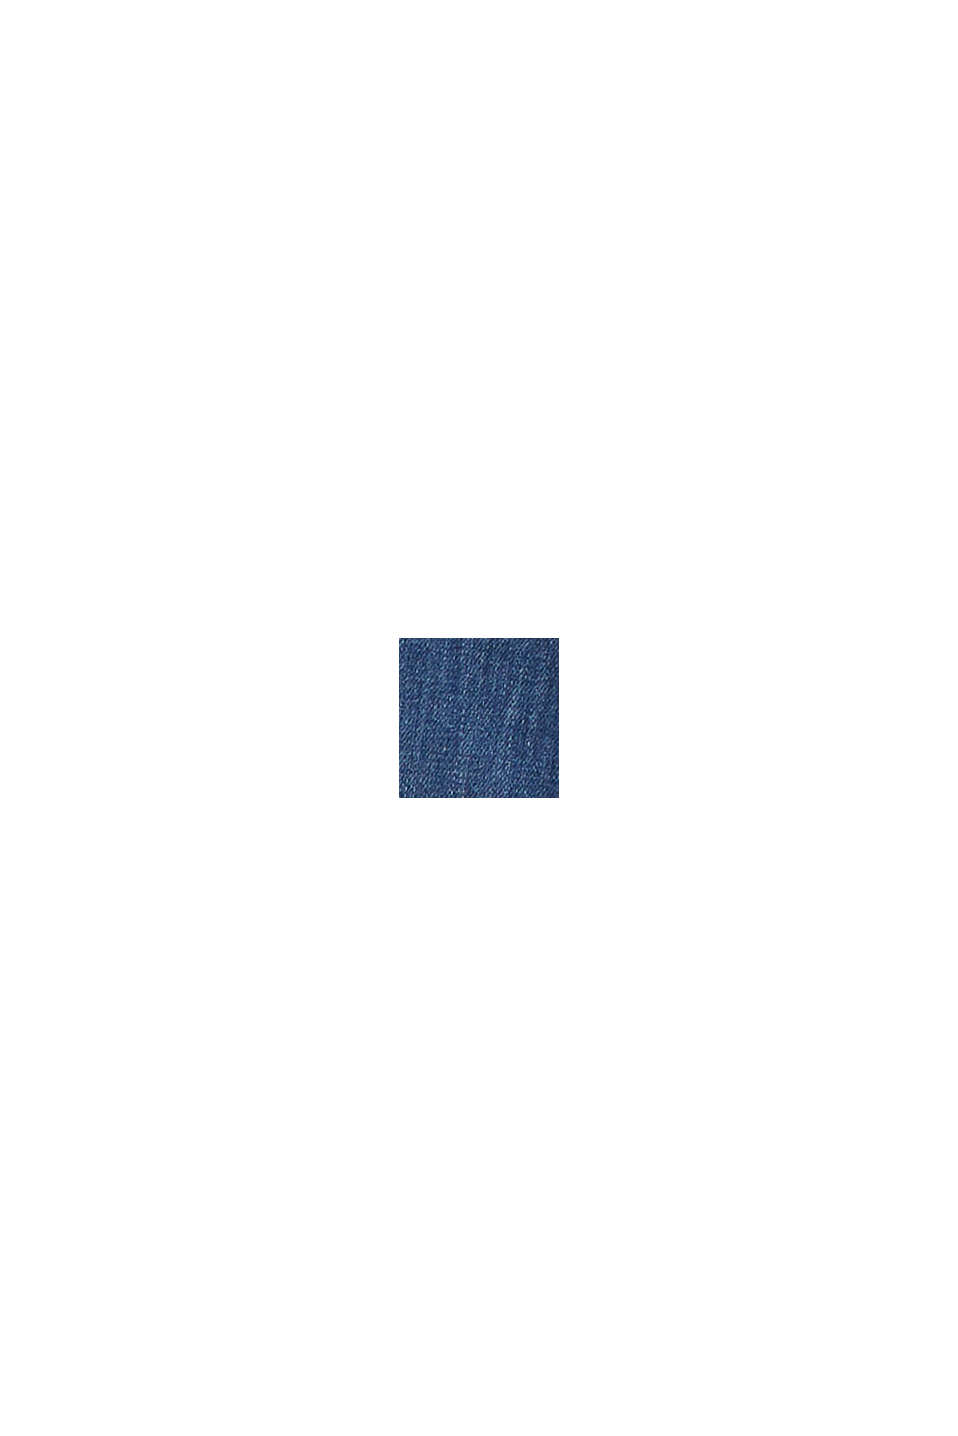 Stretch jeans made of blended organic cotton, BLUE DARK WASHED, swatch